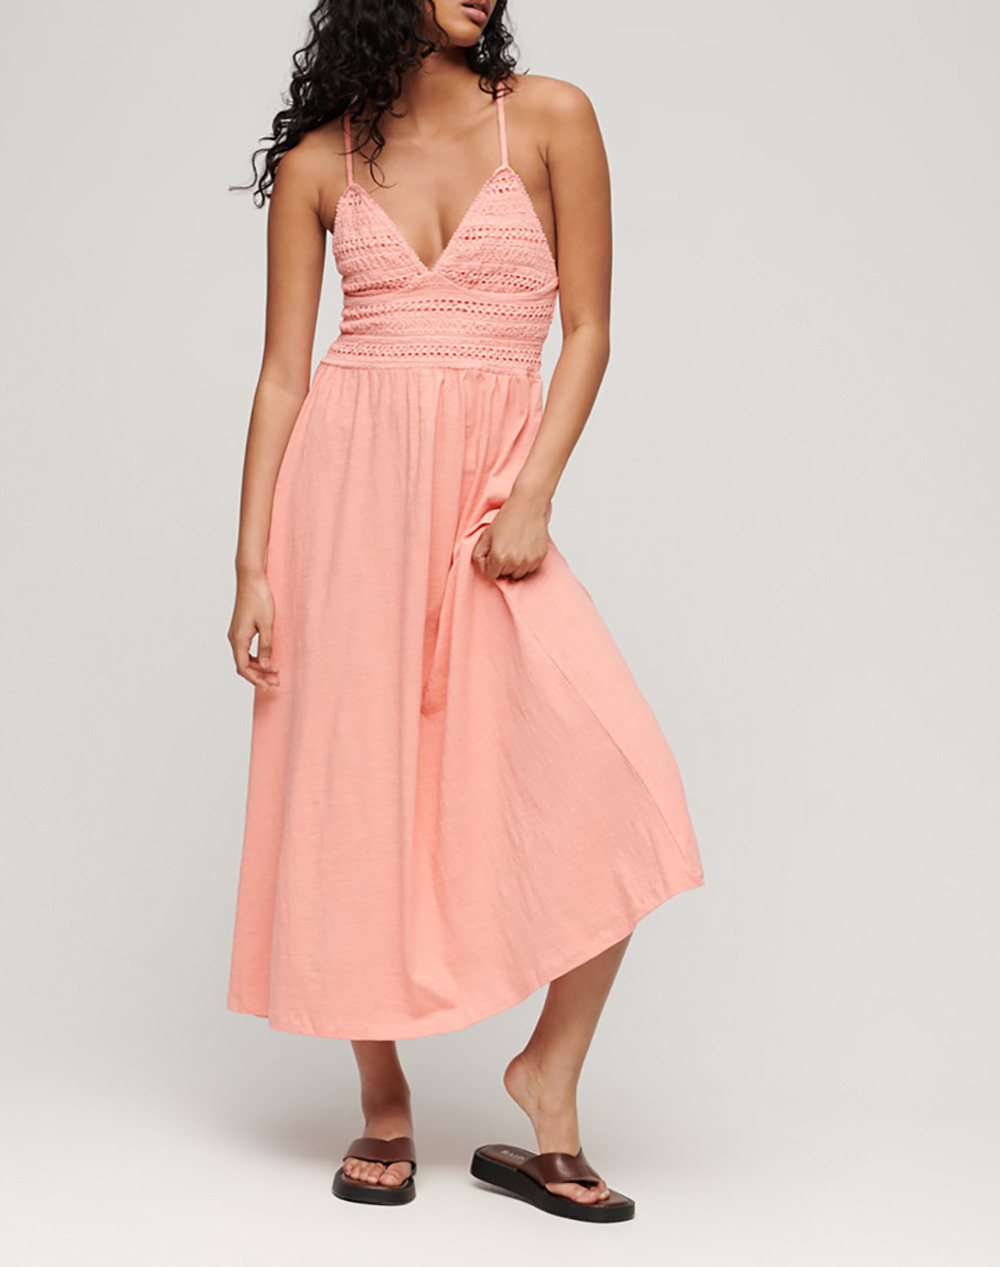 SUPERDRY D3 OVIN JERSEY LACE MAXI DRESS ΦΟΡΕΜΑ ΓΥΝΑΙΚΕΙΟ W8011637A-CO5 Coral